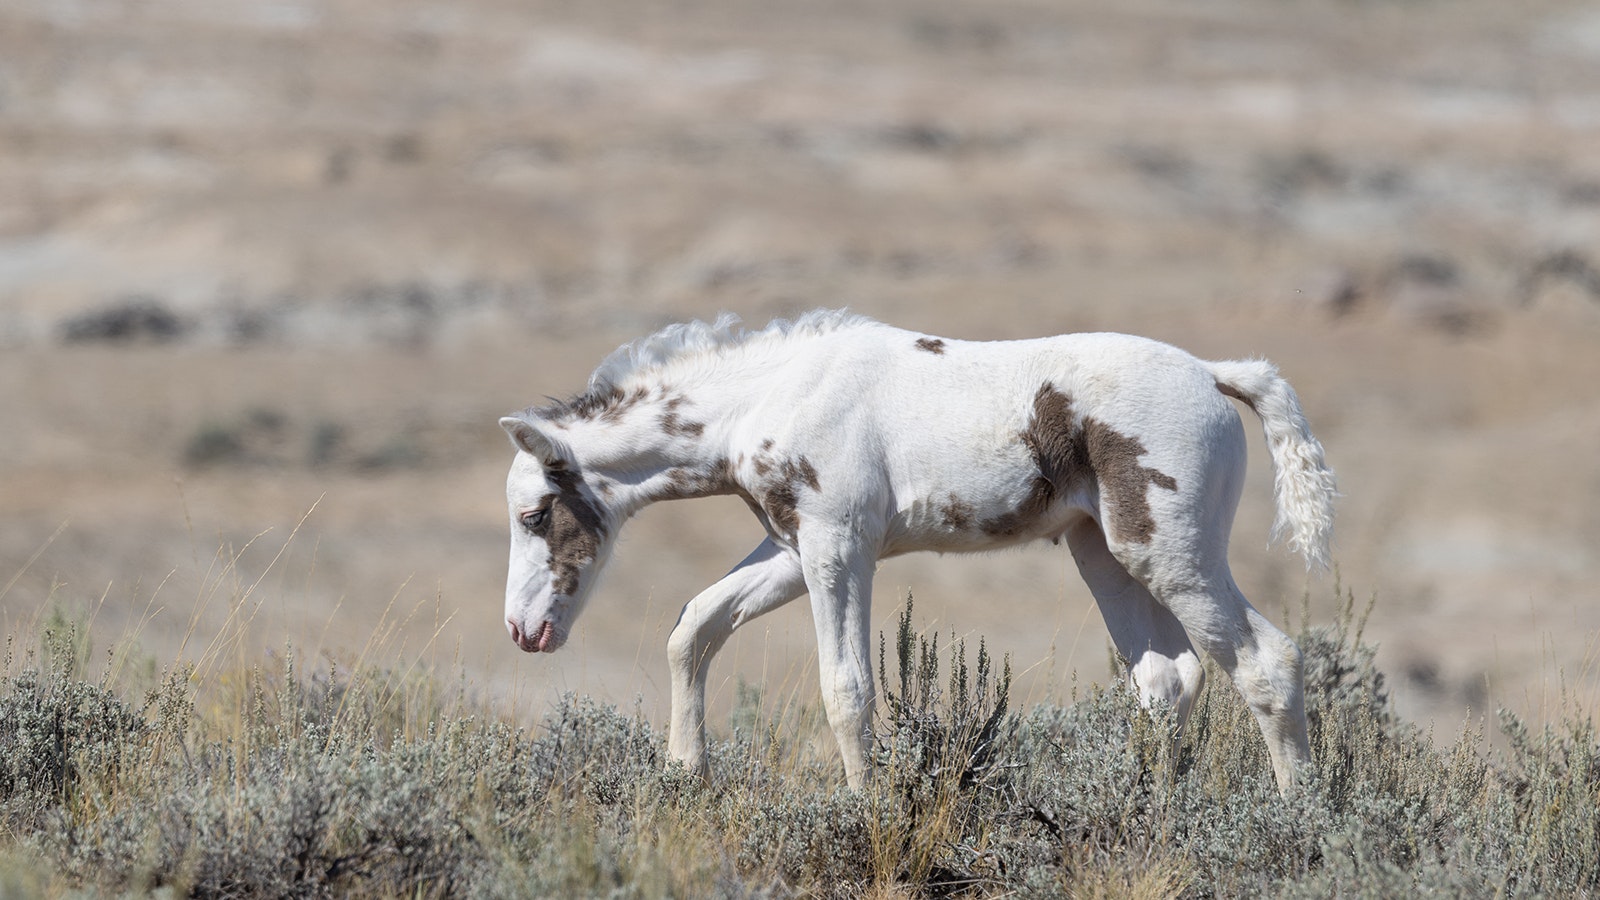 Fans of Thora, a 6-month-old filly from the McCullough Peaks mustang herd, are upset that the Bureau of Land Management opted to trap and remove her from the herd.